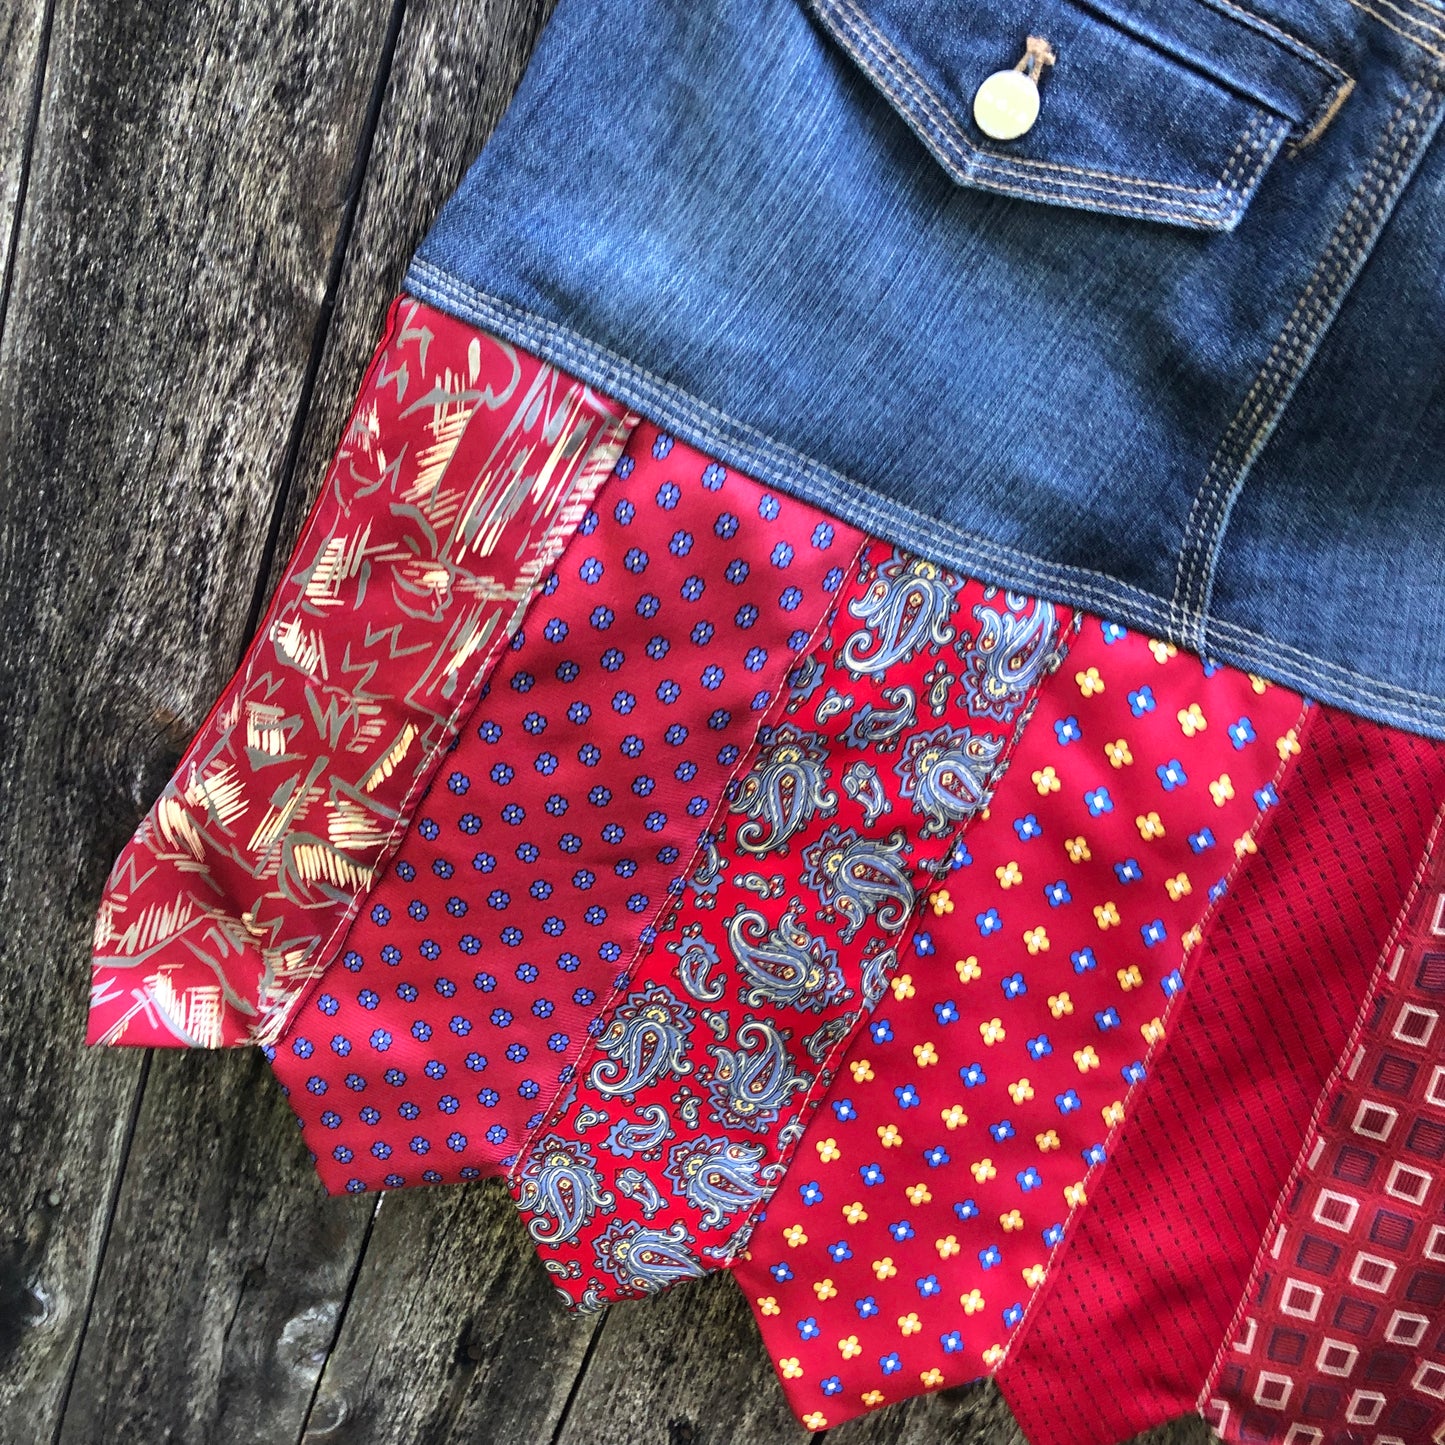 hot reds jumping frogs denim + tie skirt, (size 0/2)